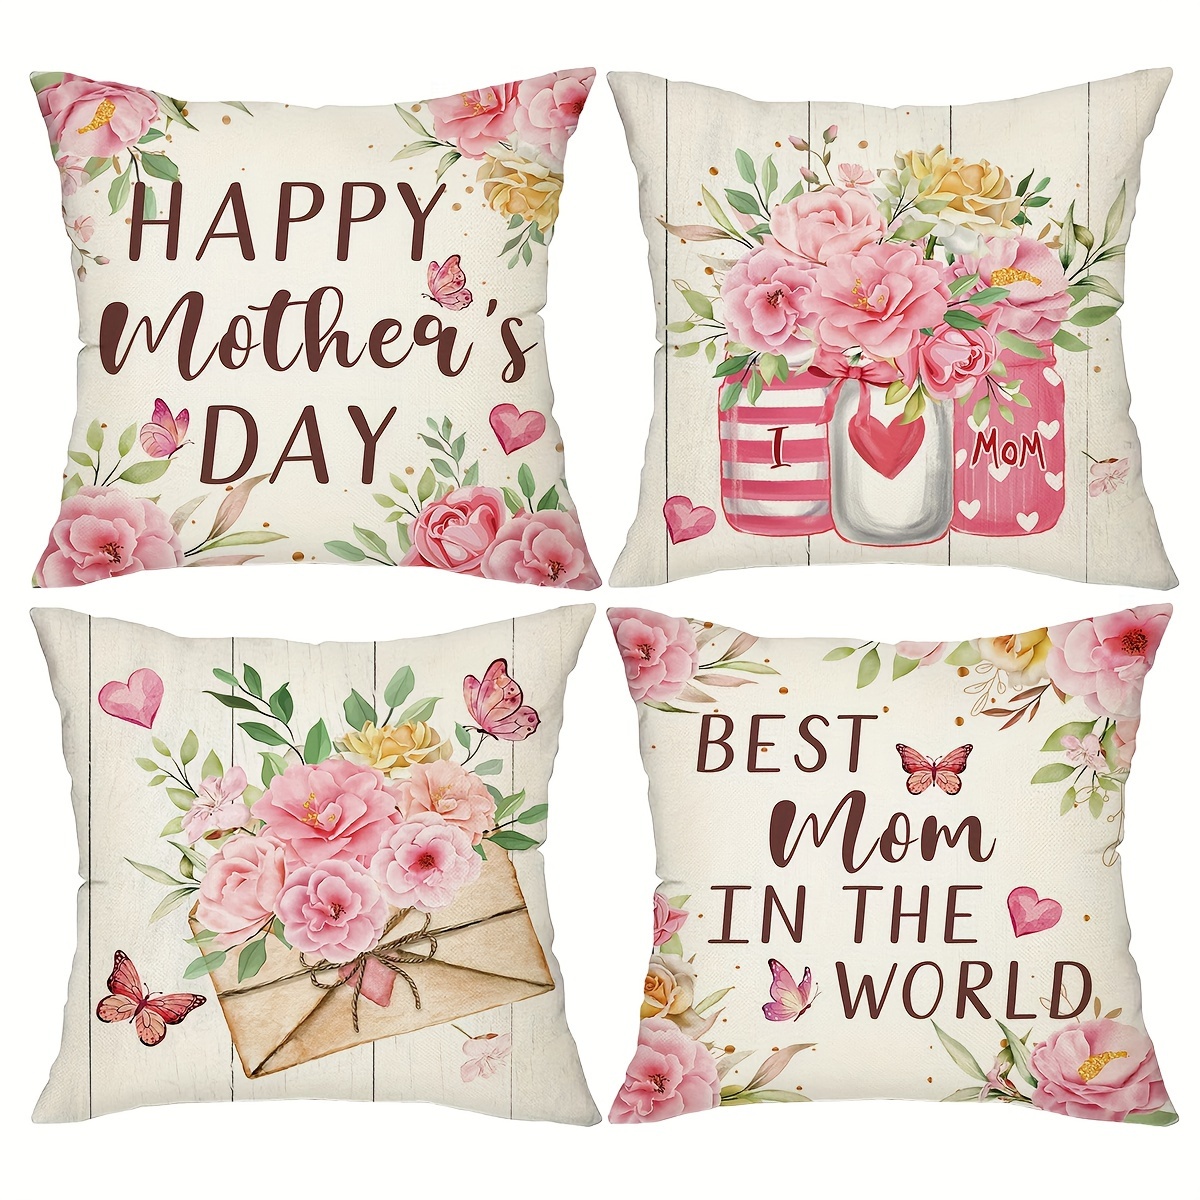 

4pcs, Happy Mother's Day Decorative Throw Pillow Covers,18*18inch Flowers Cushion Cases Sweet Home Decor,gifts For Mom,for Porch Patio Couch Sofa Living Room Outdoor,set Of 4,without Pillow Inserts